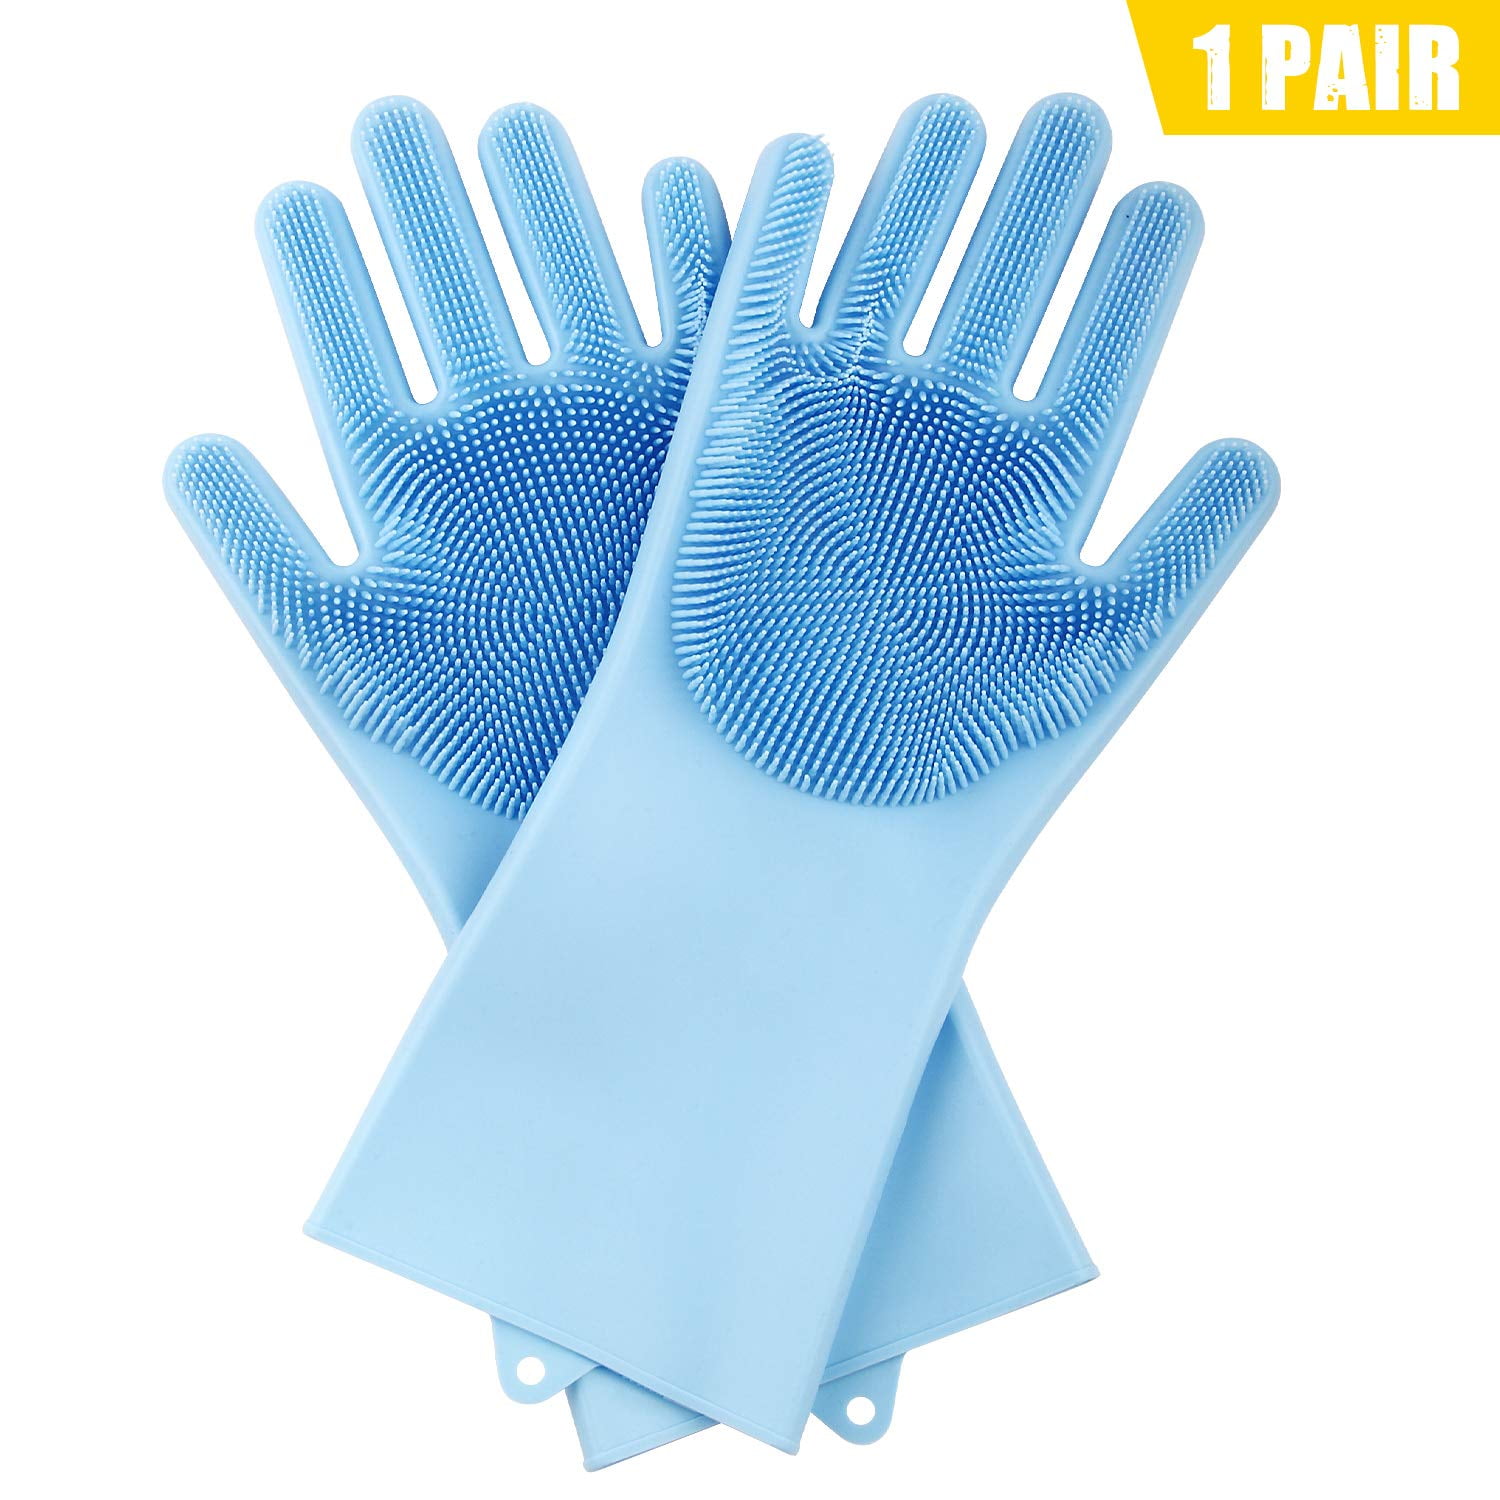 Double-Sided Silicone dishwashing Gloves car wash pet Hair Care Reusable Cleaning Brush Heat-Resistant Scrub Rubber Gloves for dishwashing Cleaning 